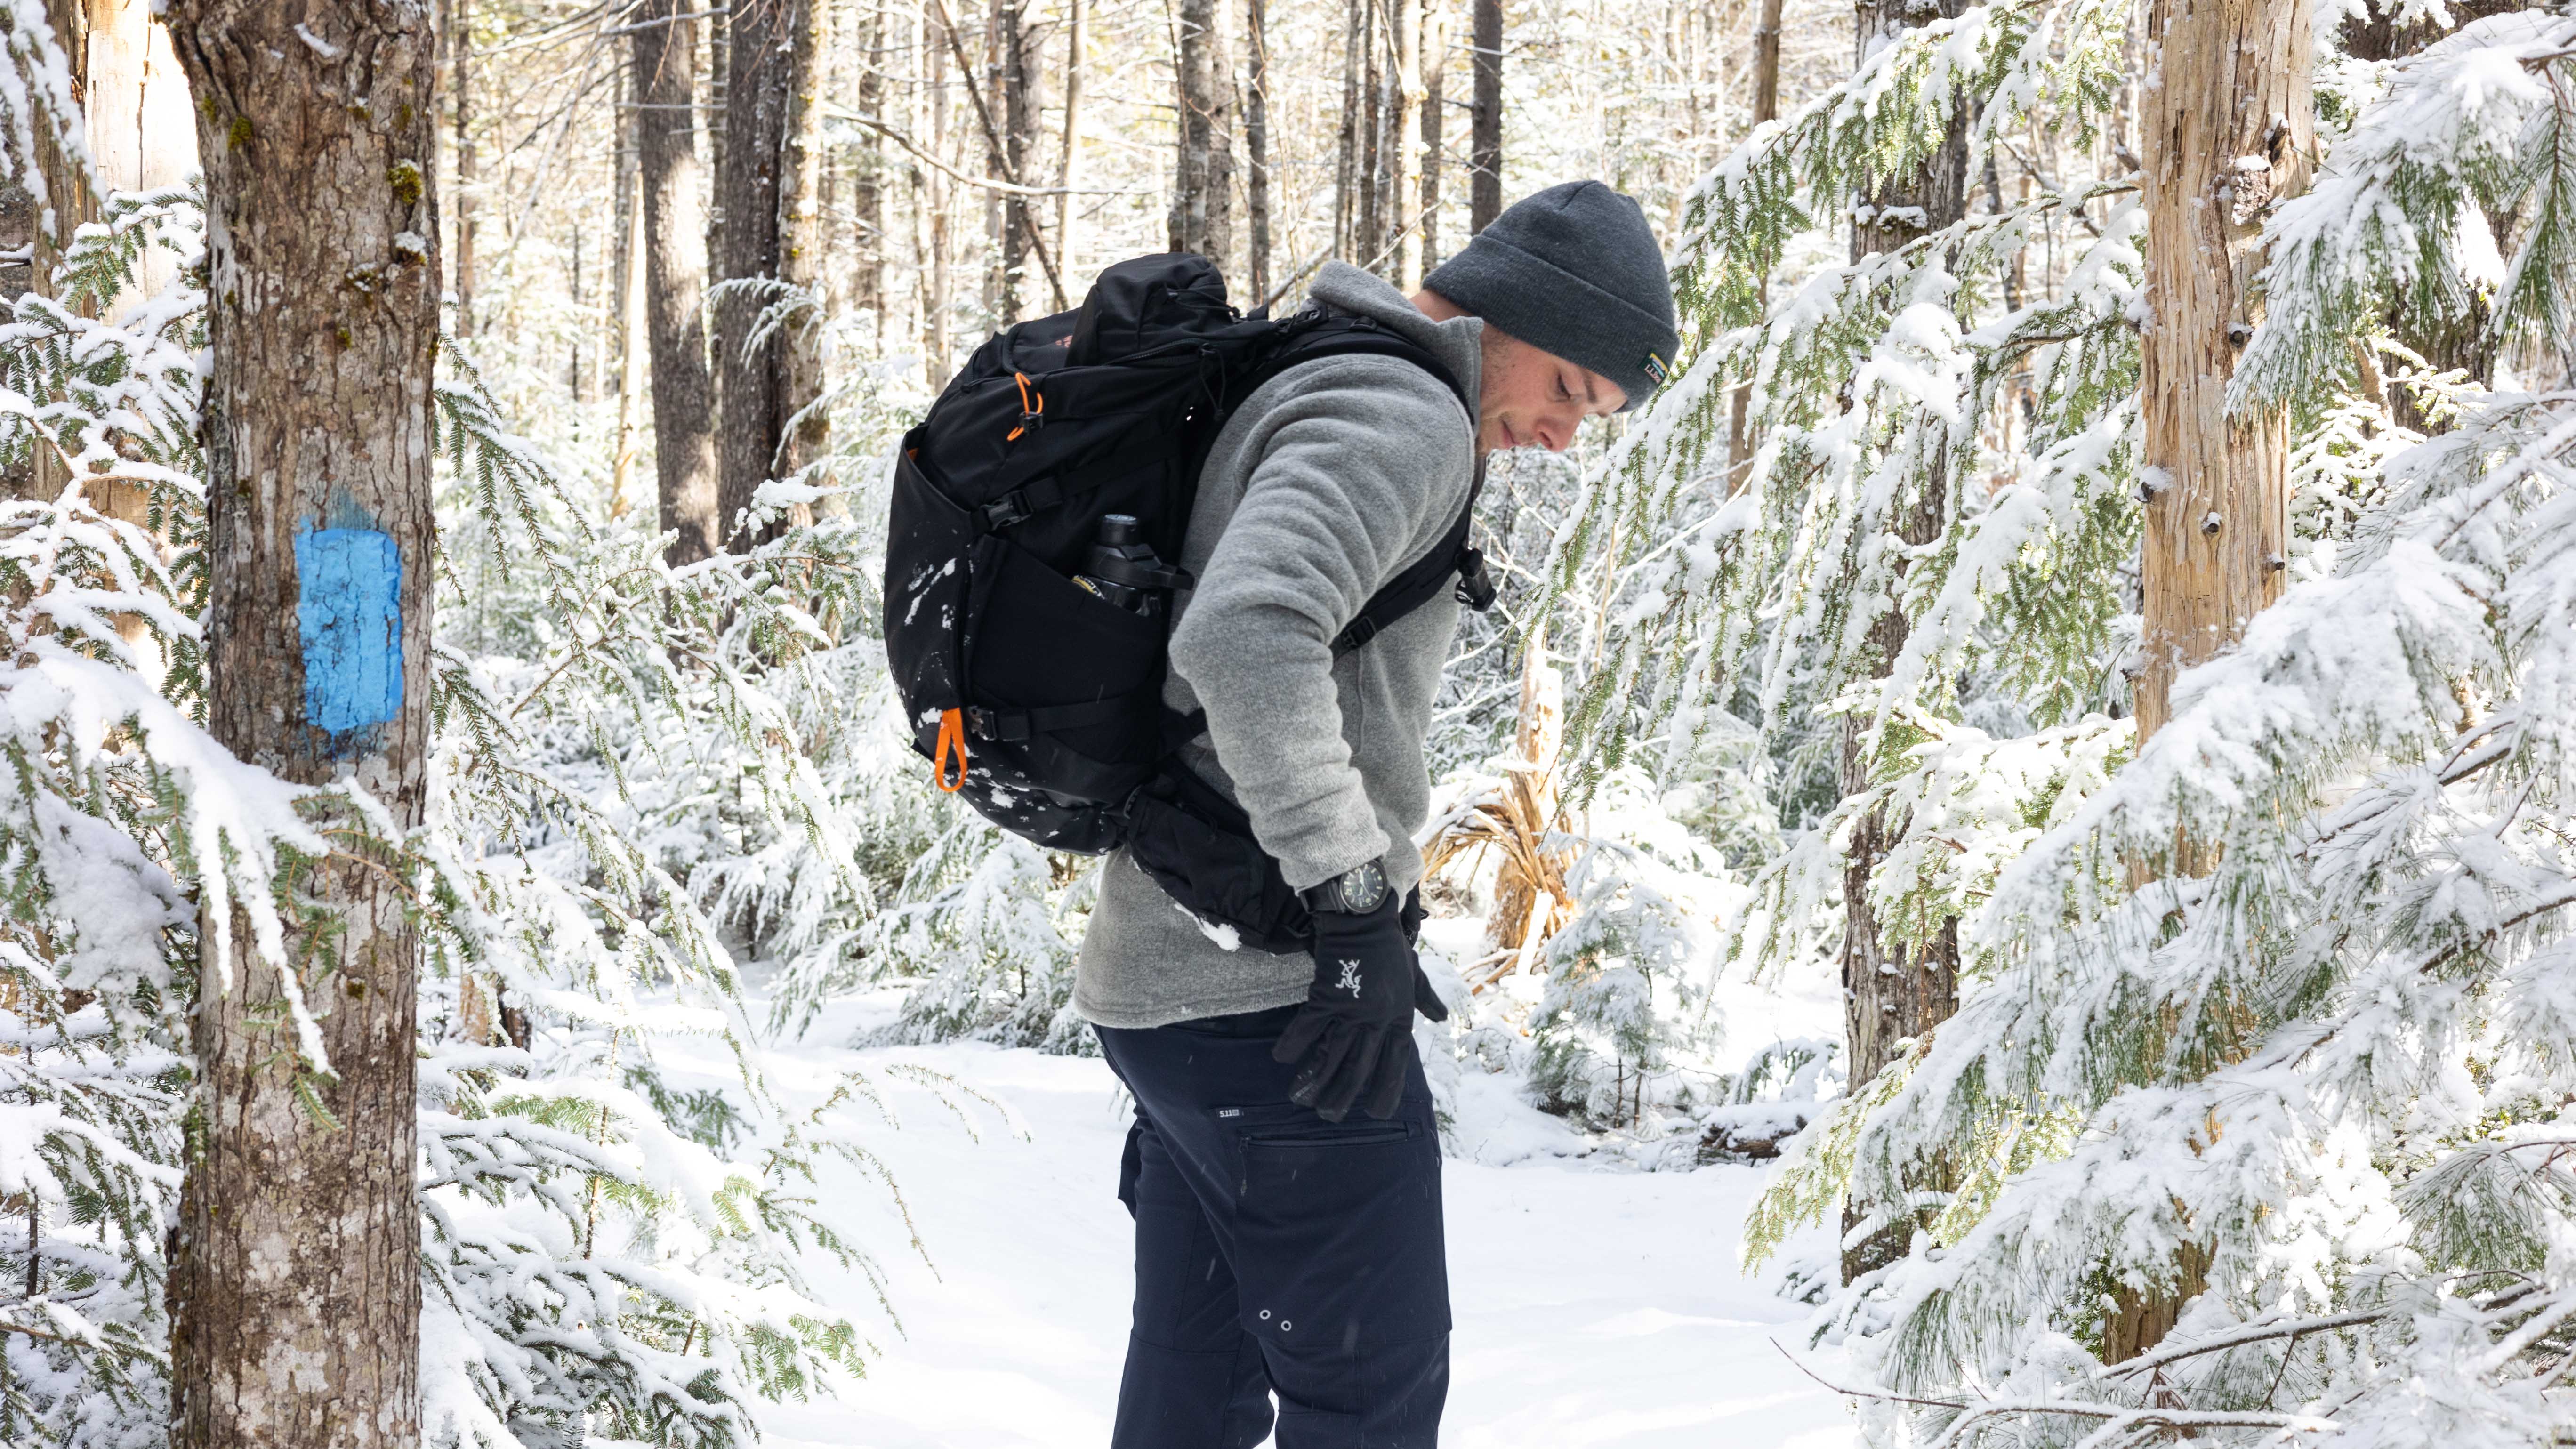 AllOutdoor Review - Mystery Ranch Coulee 30 Hiking/EDC Pack